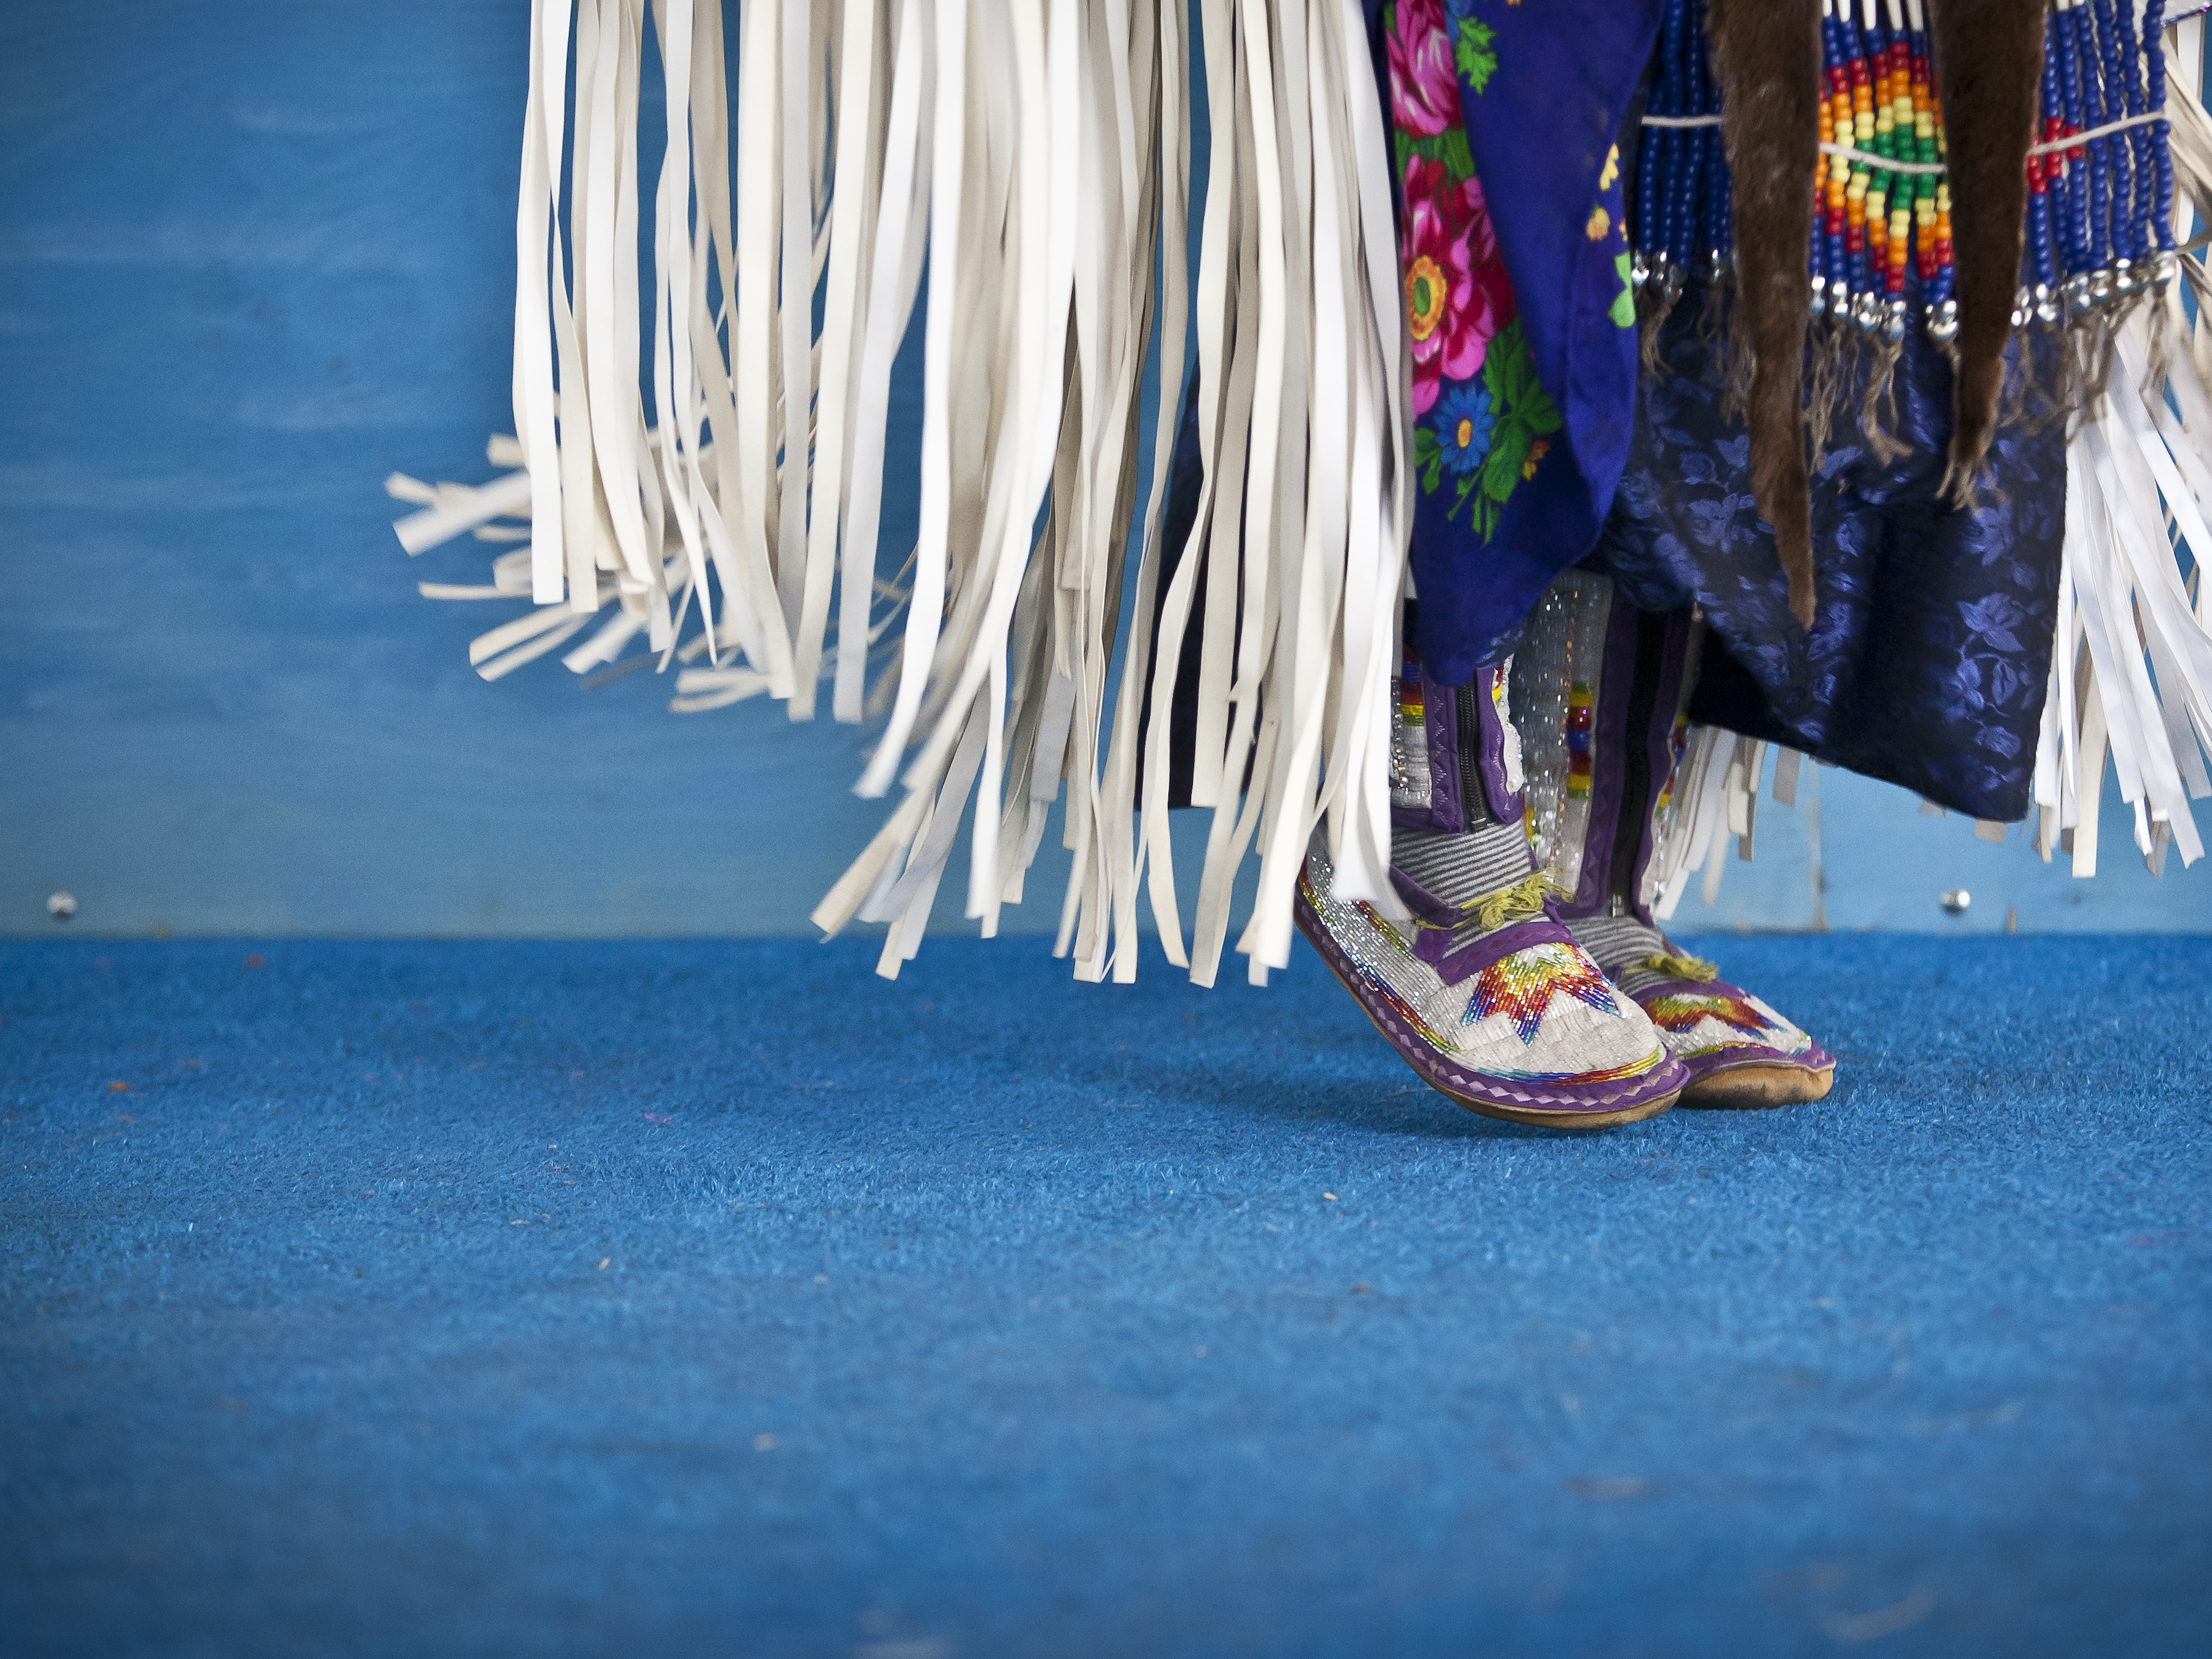 Indigenous person wearing traditional clothing and moccasins